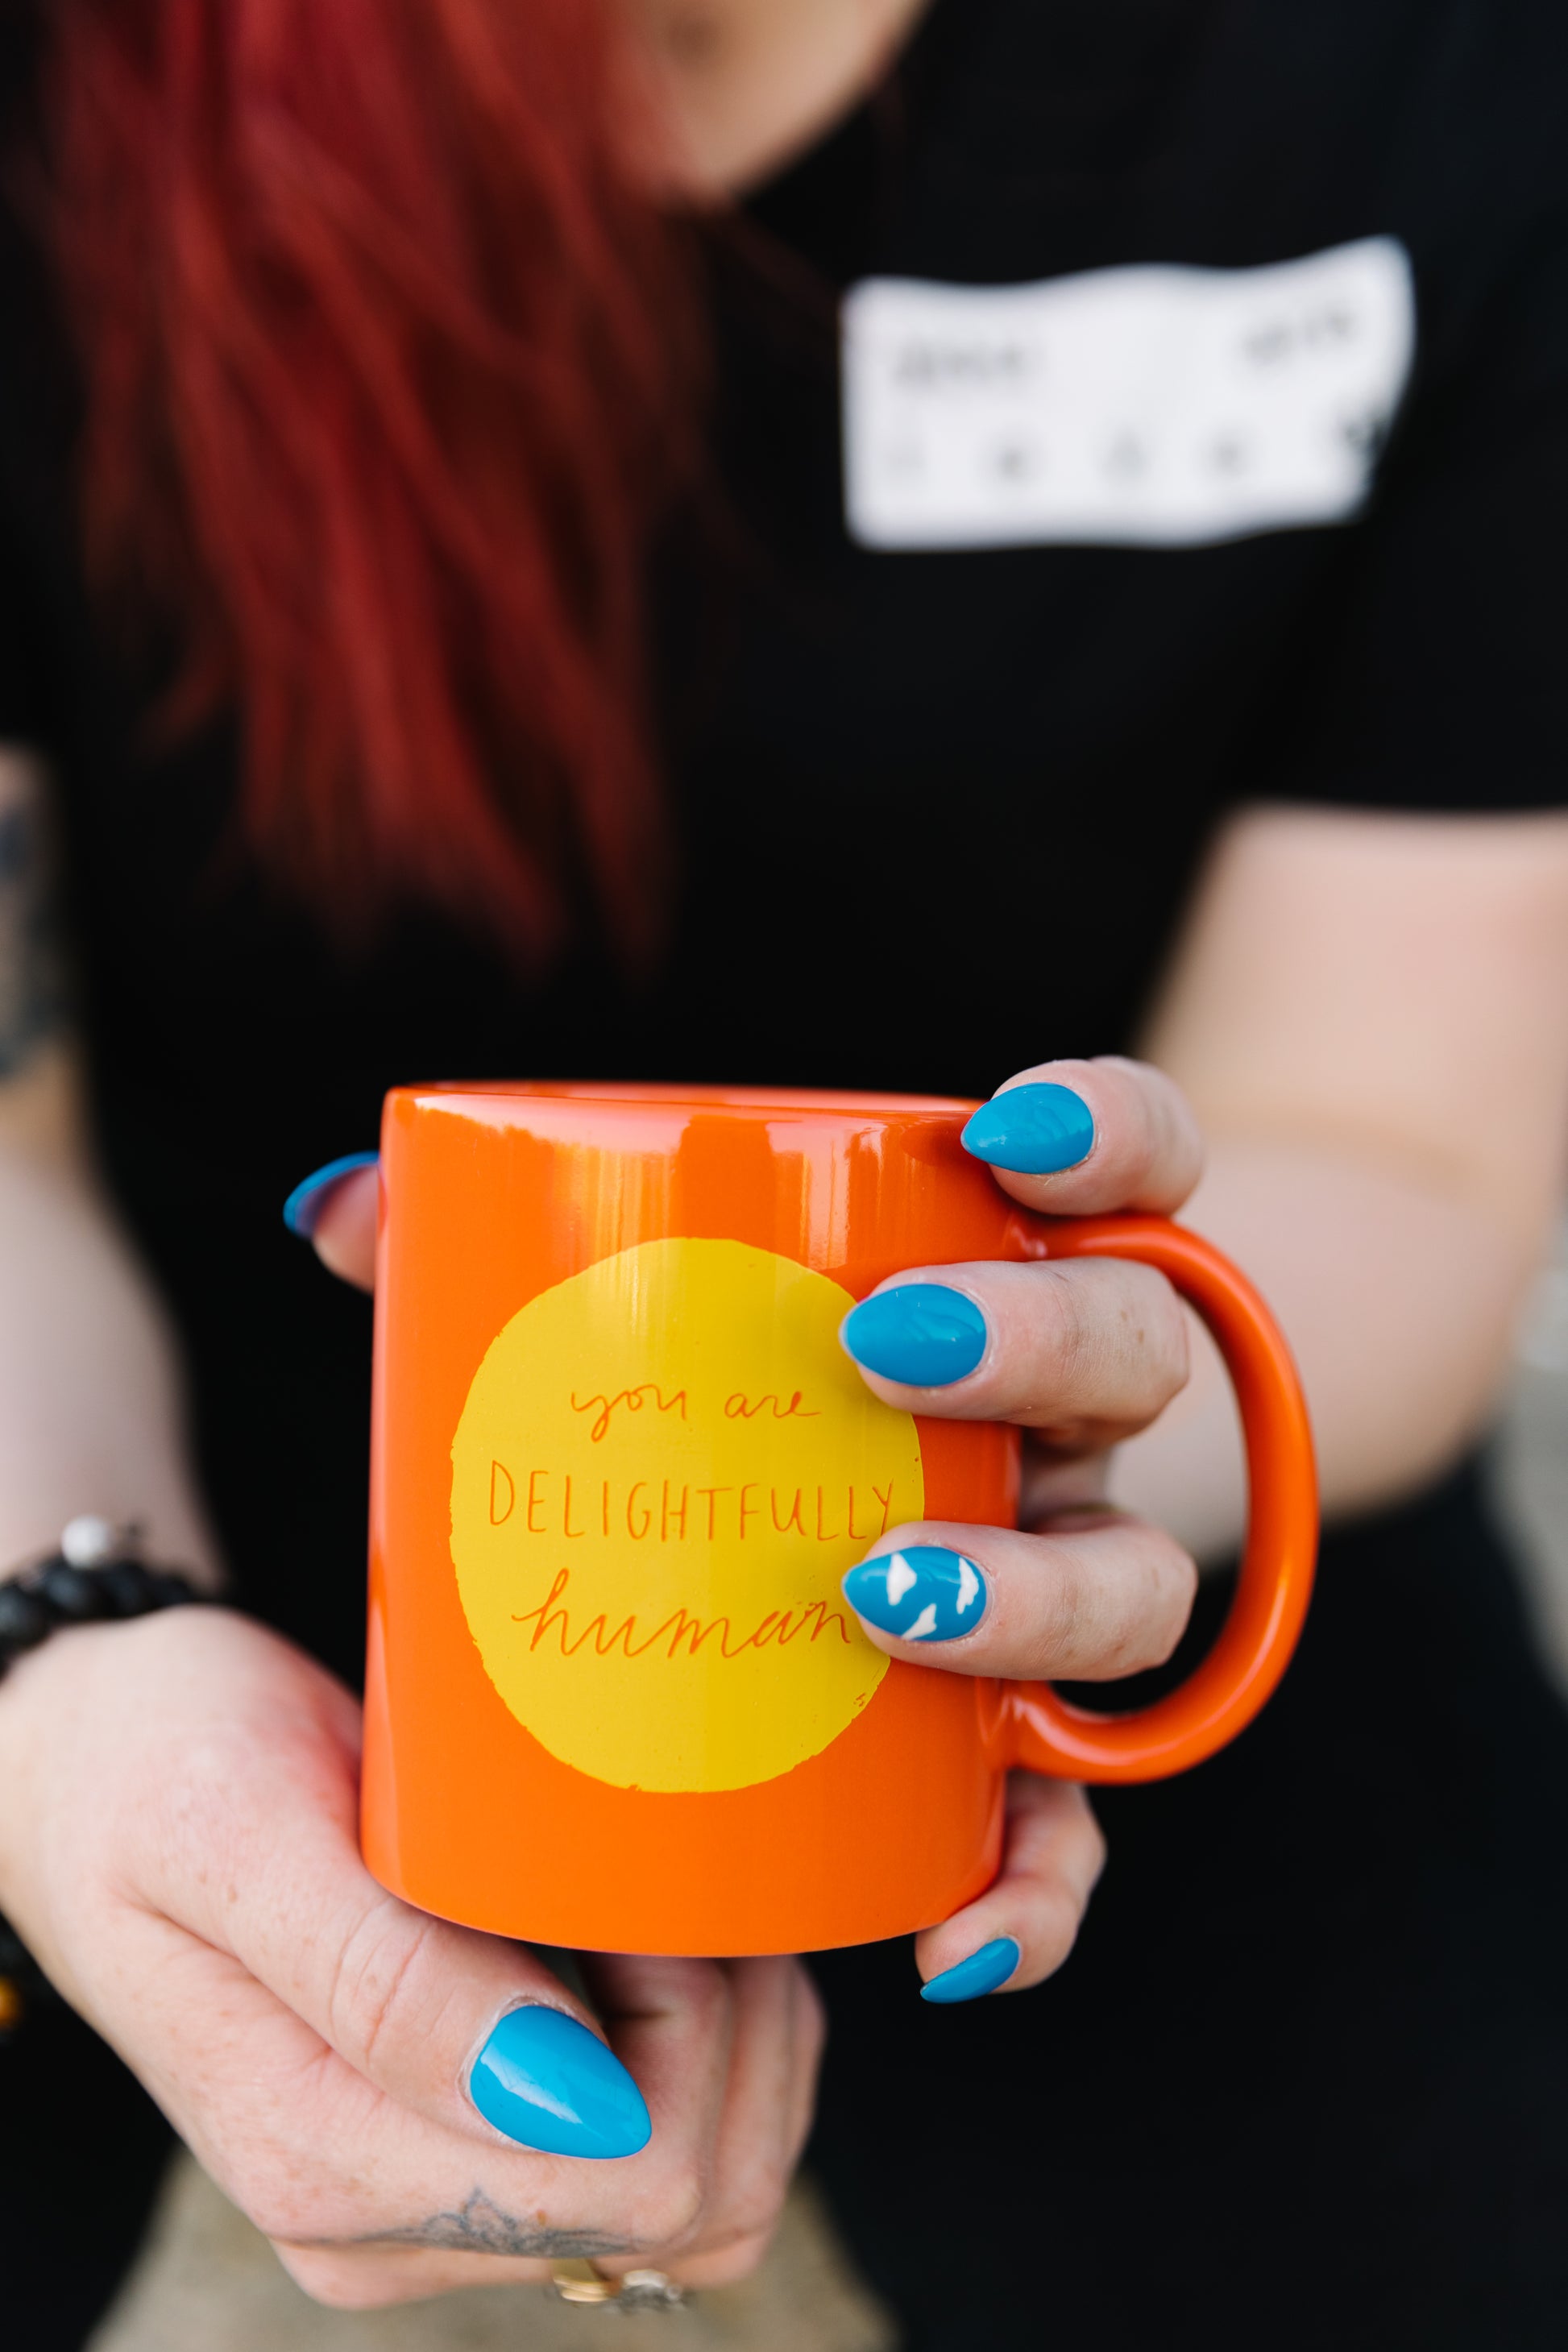 Hands holding a bright orange mug with a yellow circle in the center of the mug that says "you are delightfully human"